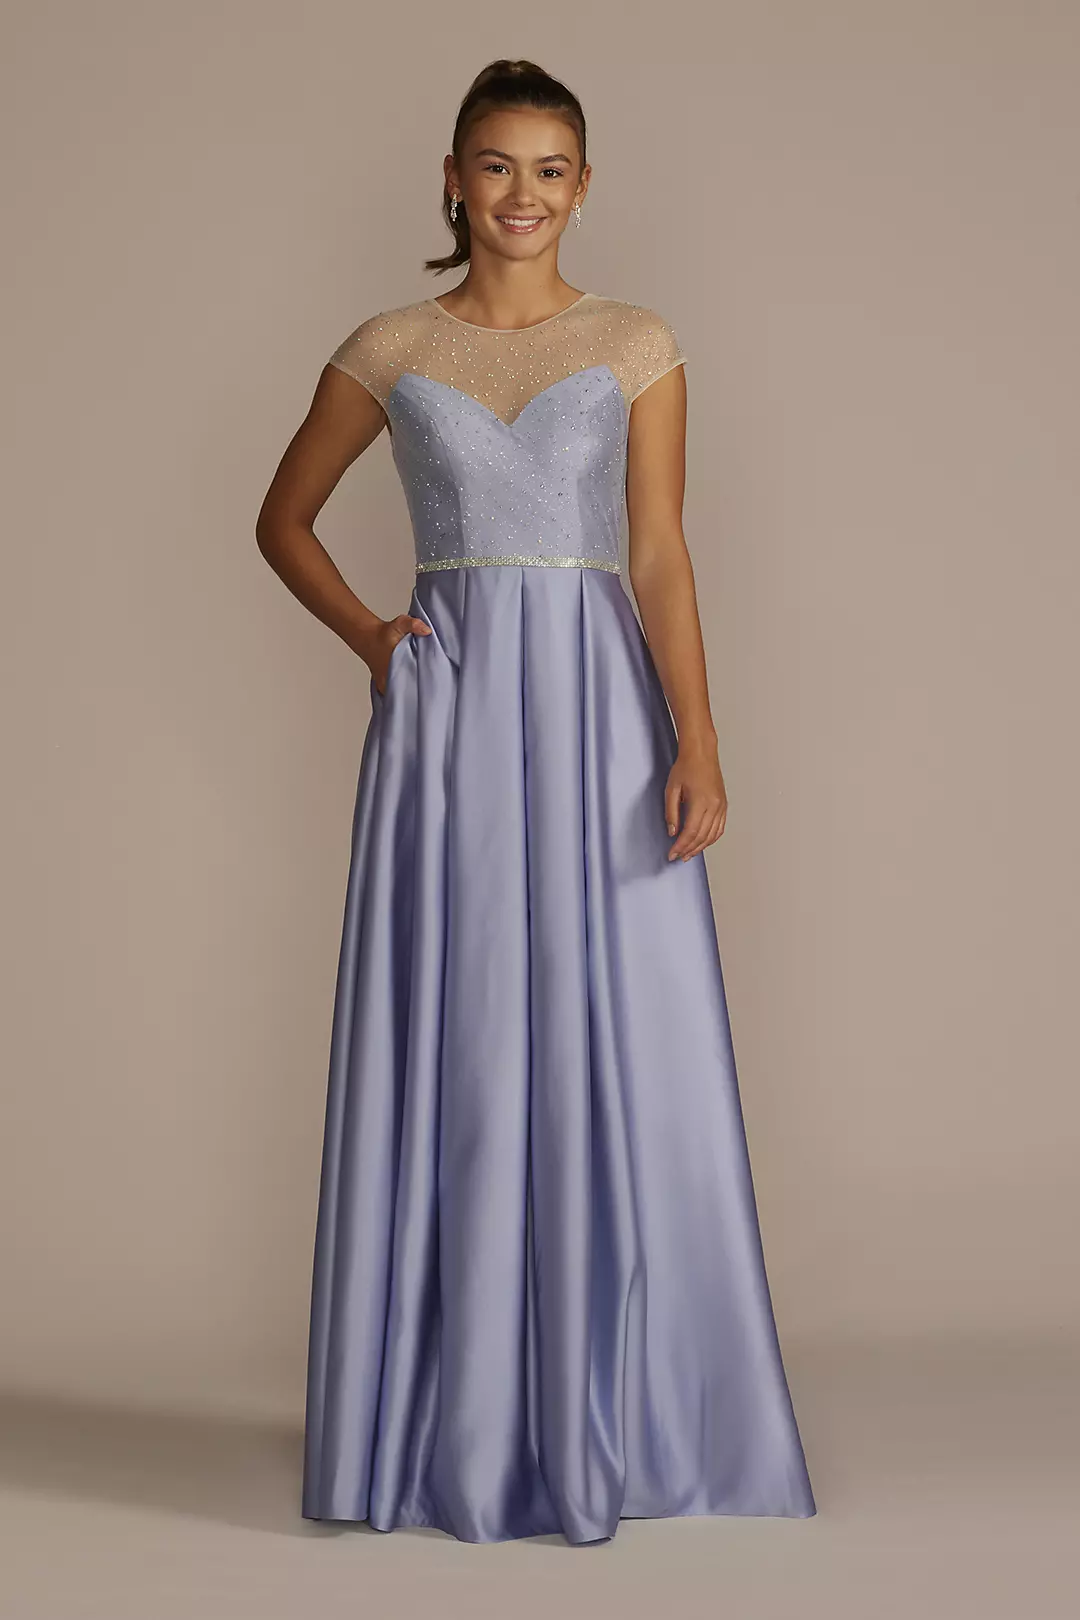 Satin Ball Gown with Sheer Embellished Top Image